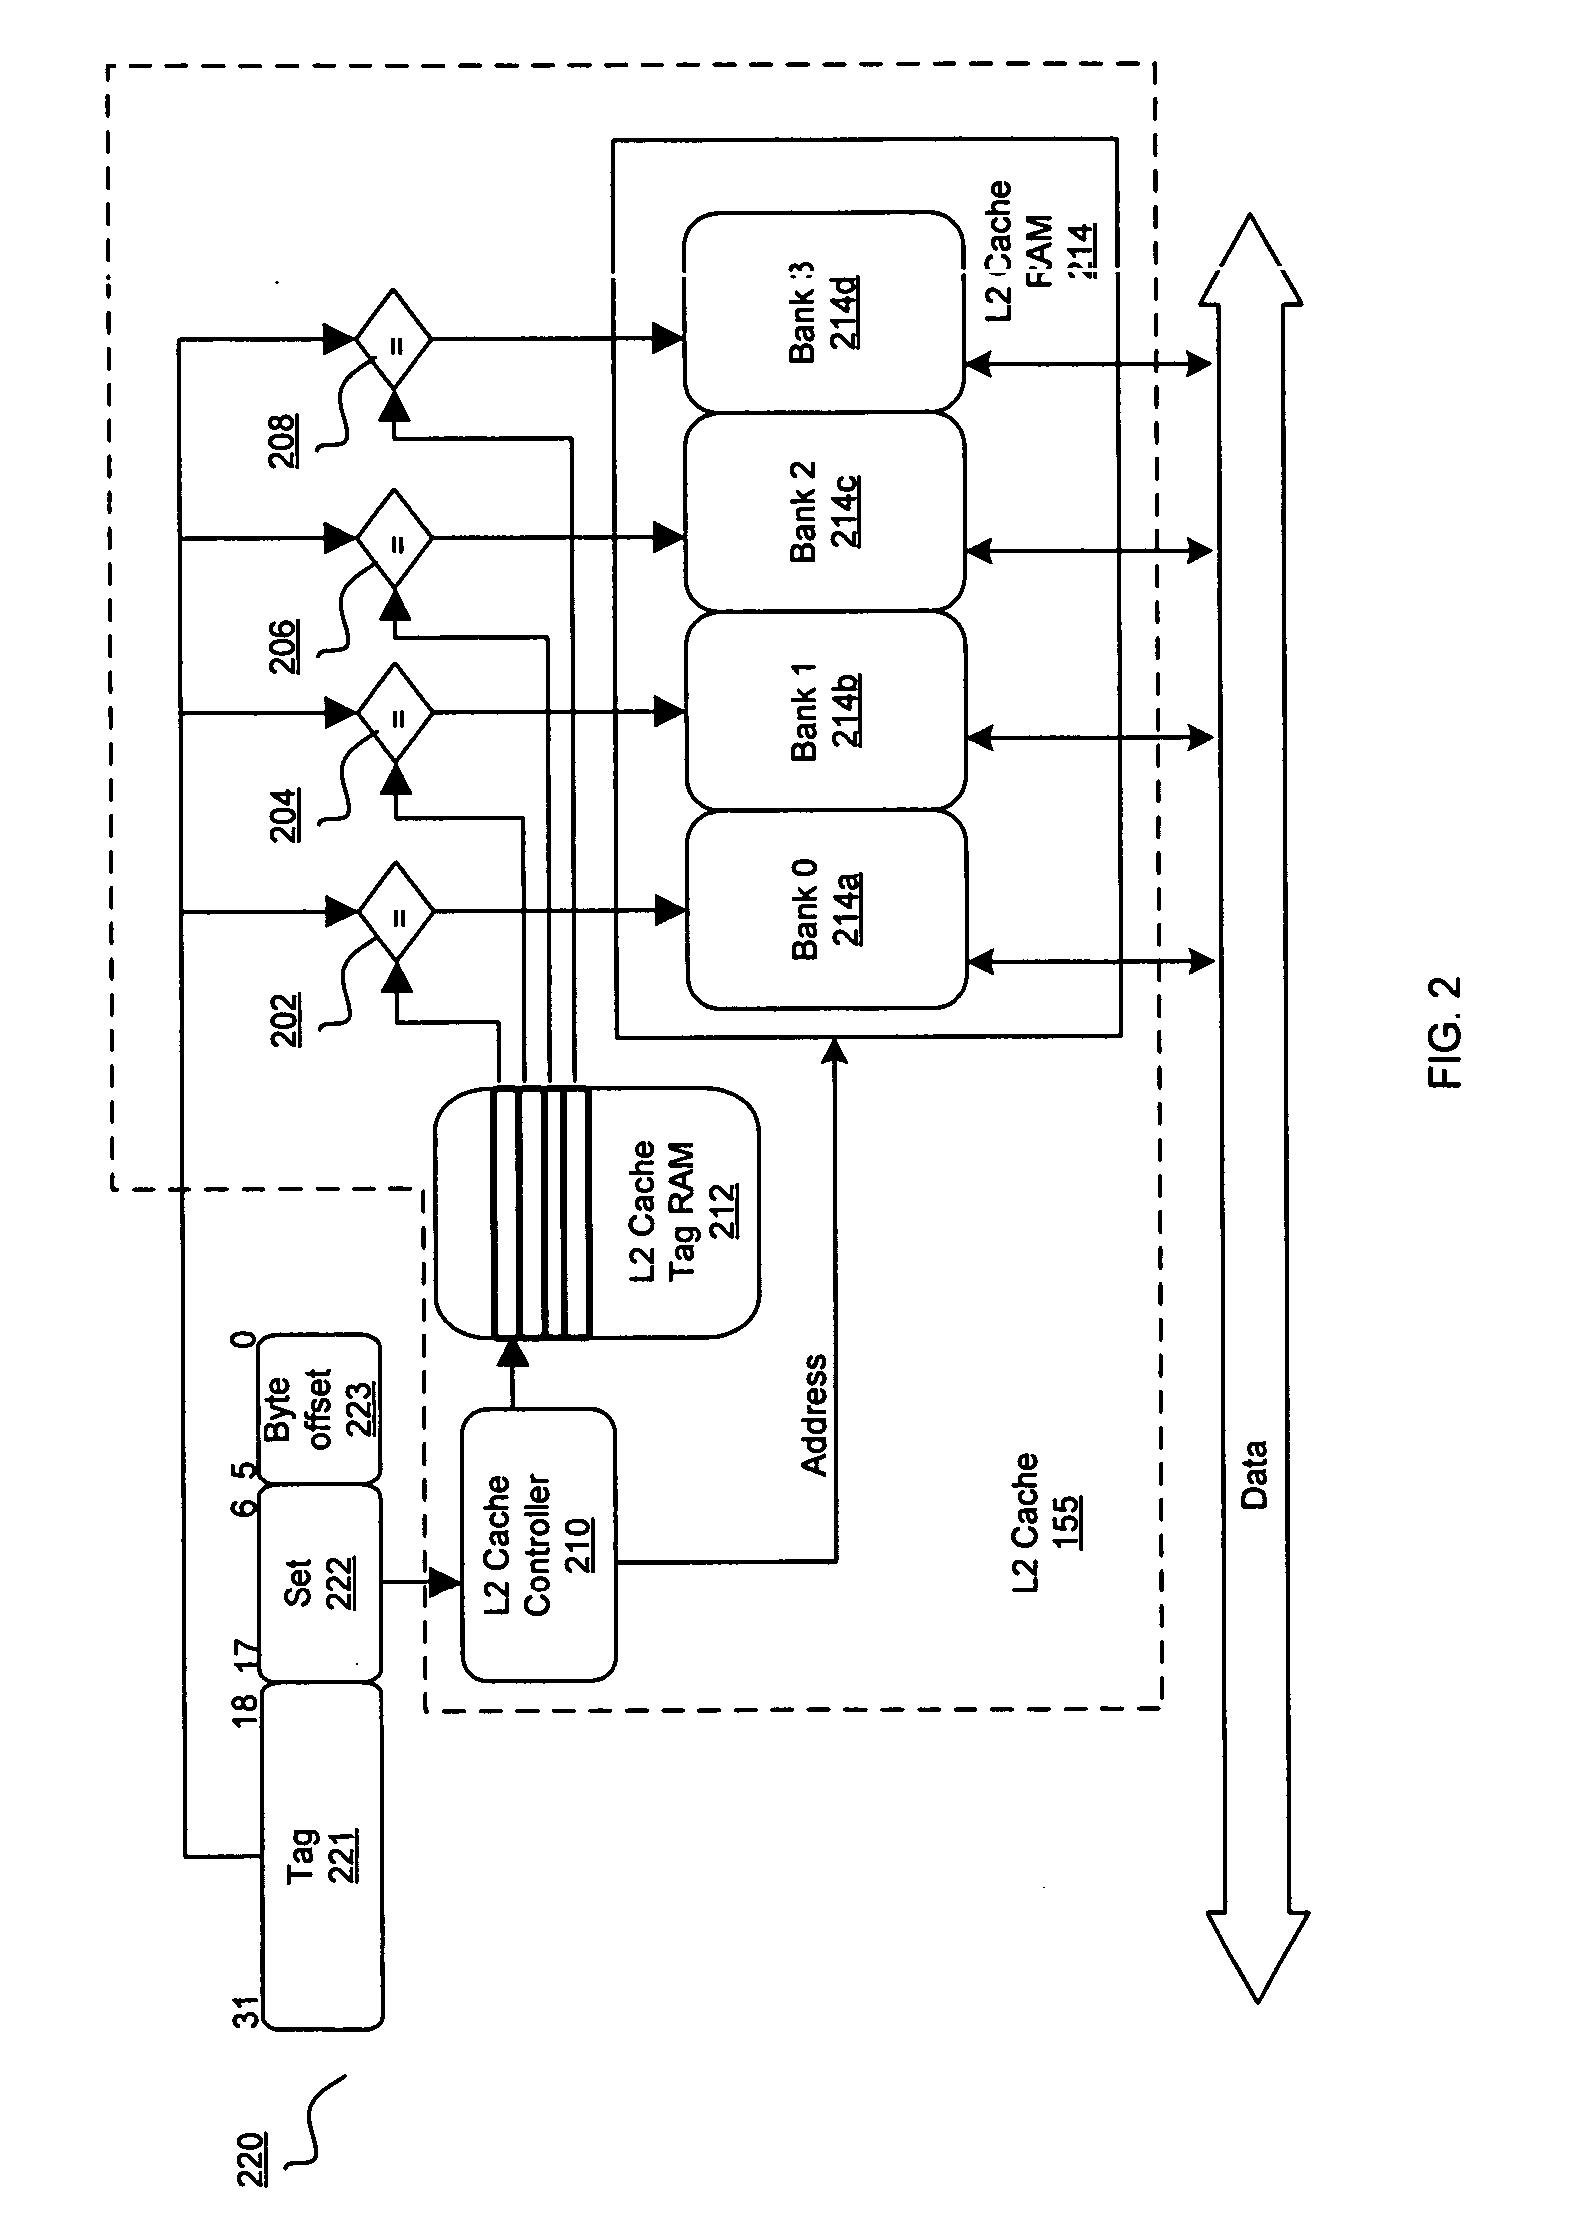 Method and system for on-chip configurable data ram for fast memory and pseudo associative caches